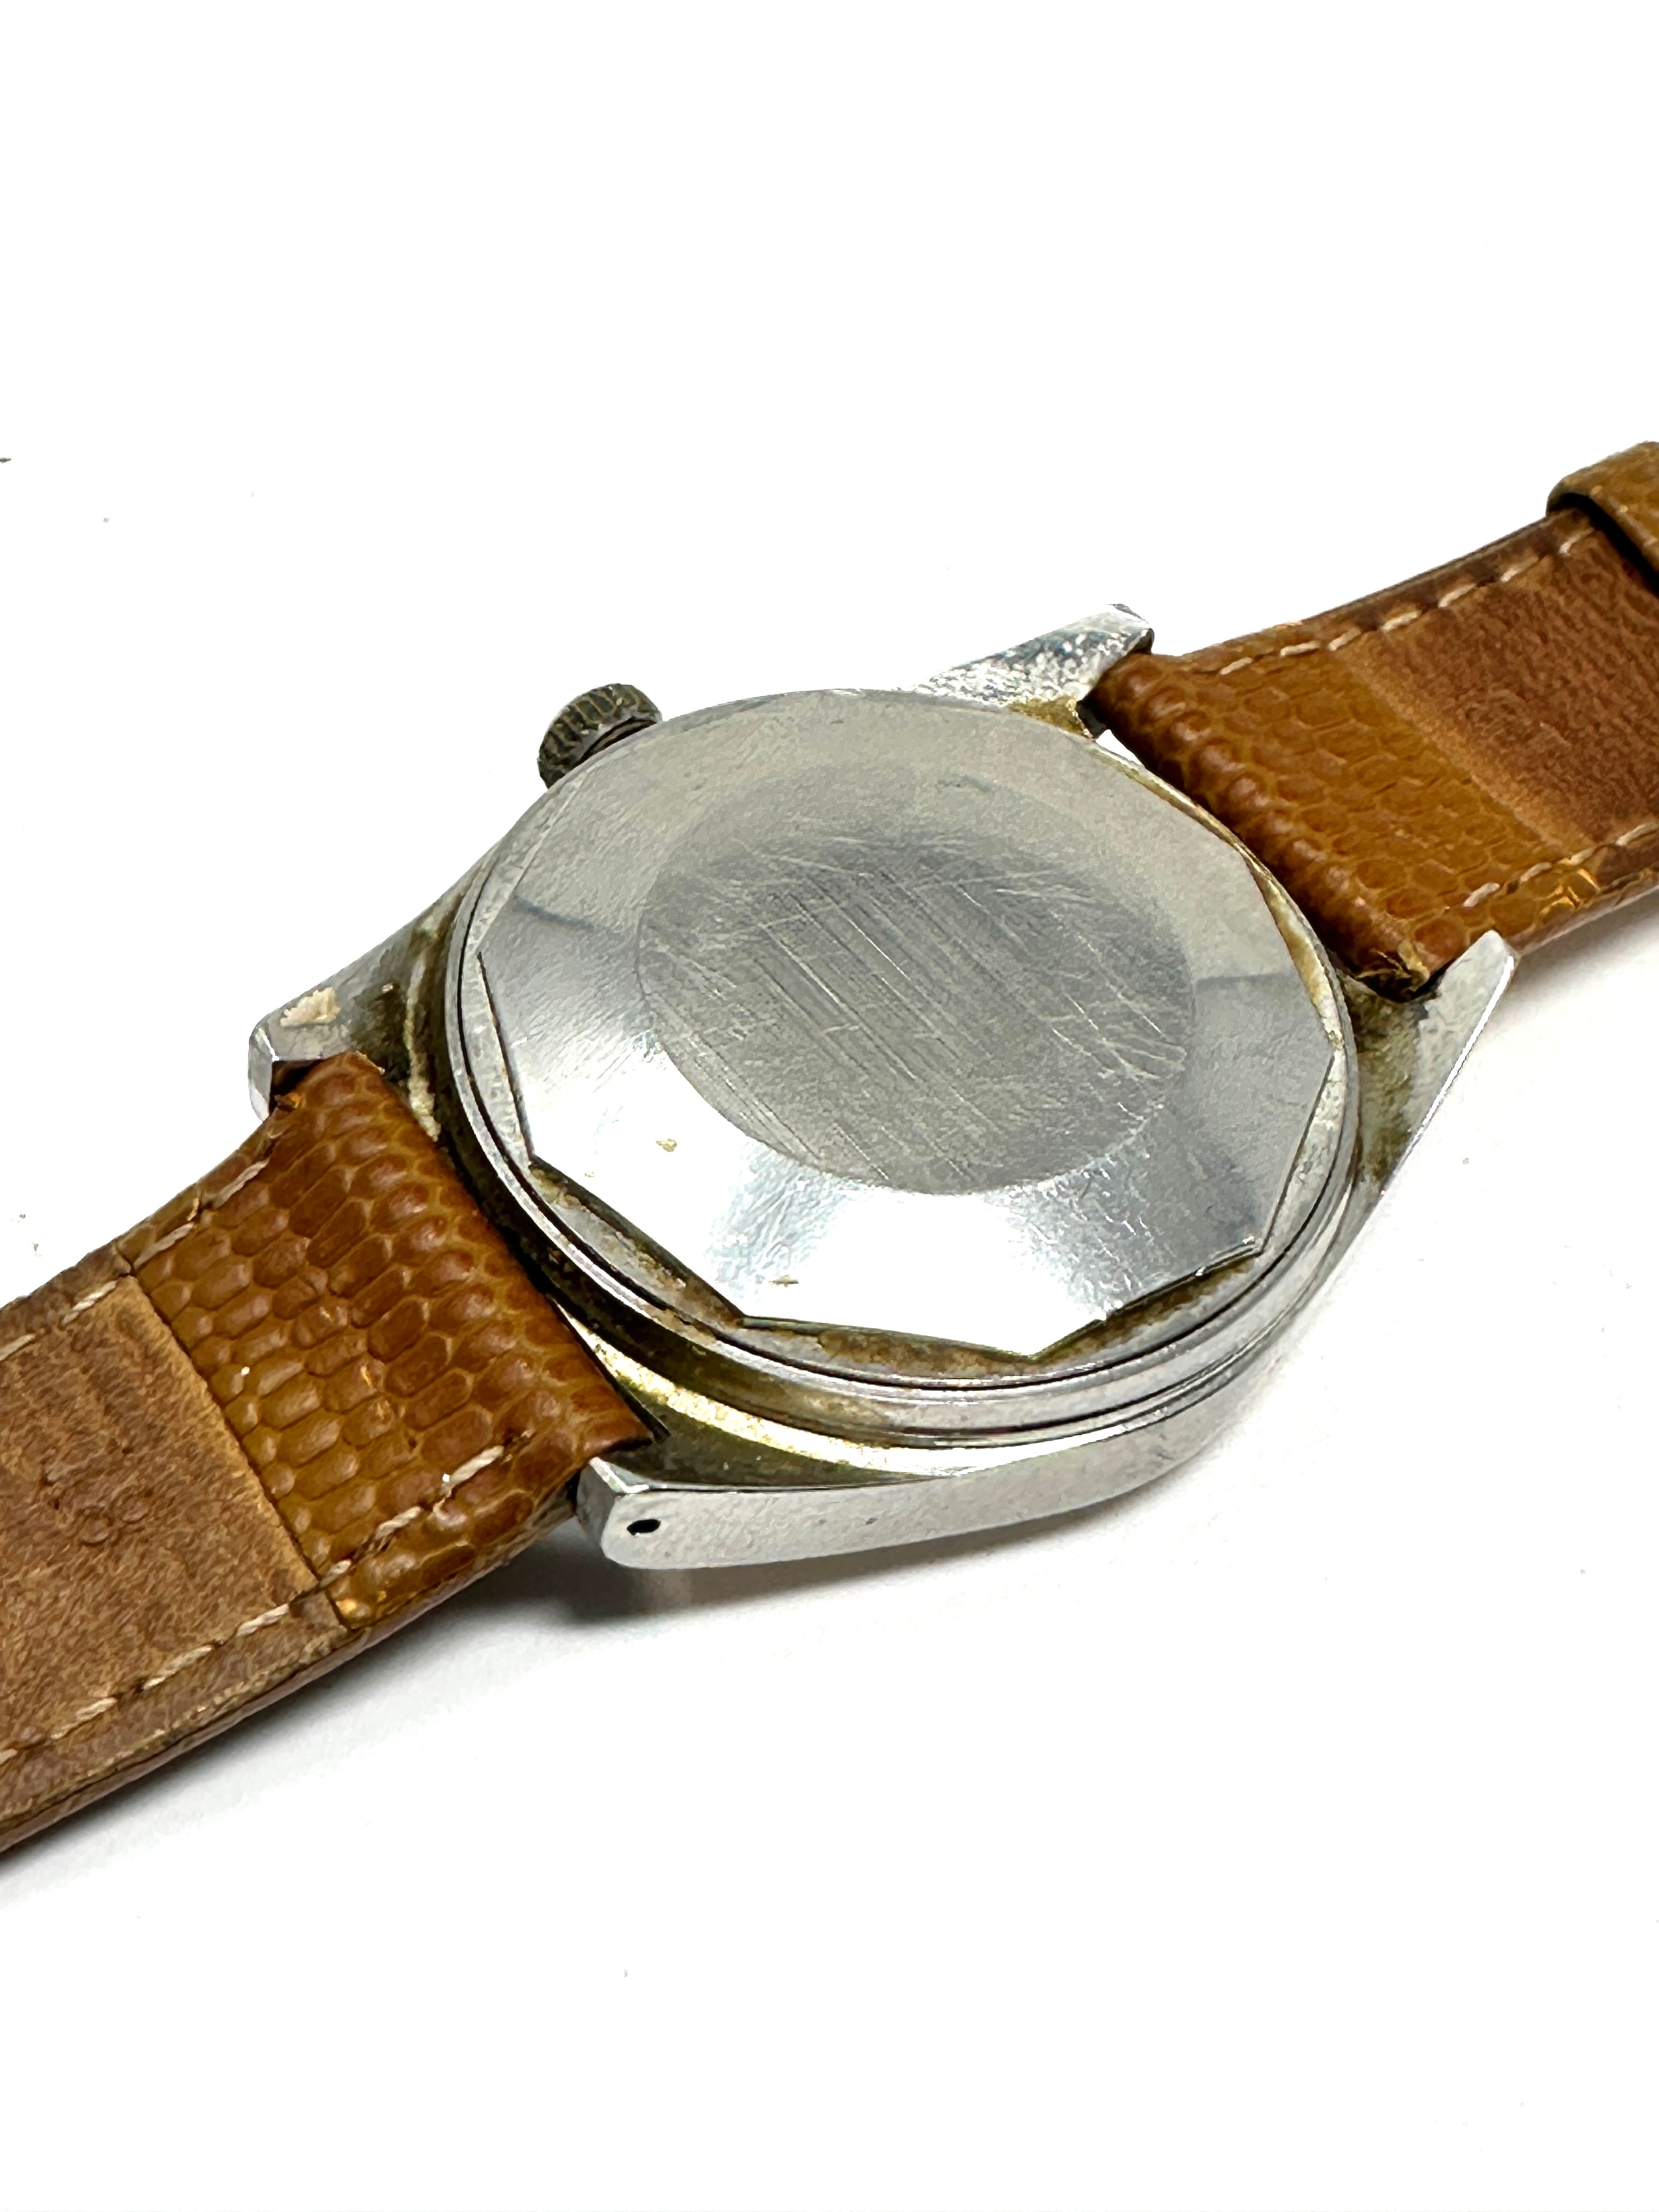 Vintage tissot visodate automatic seastar pr156 gents wristwatch the watch is ticking - Image 4 of 4